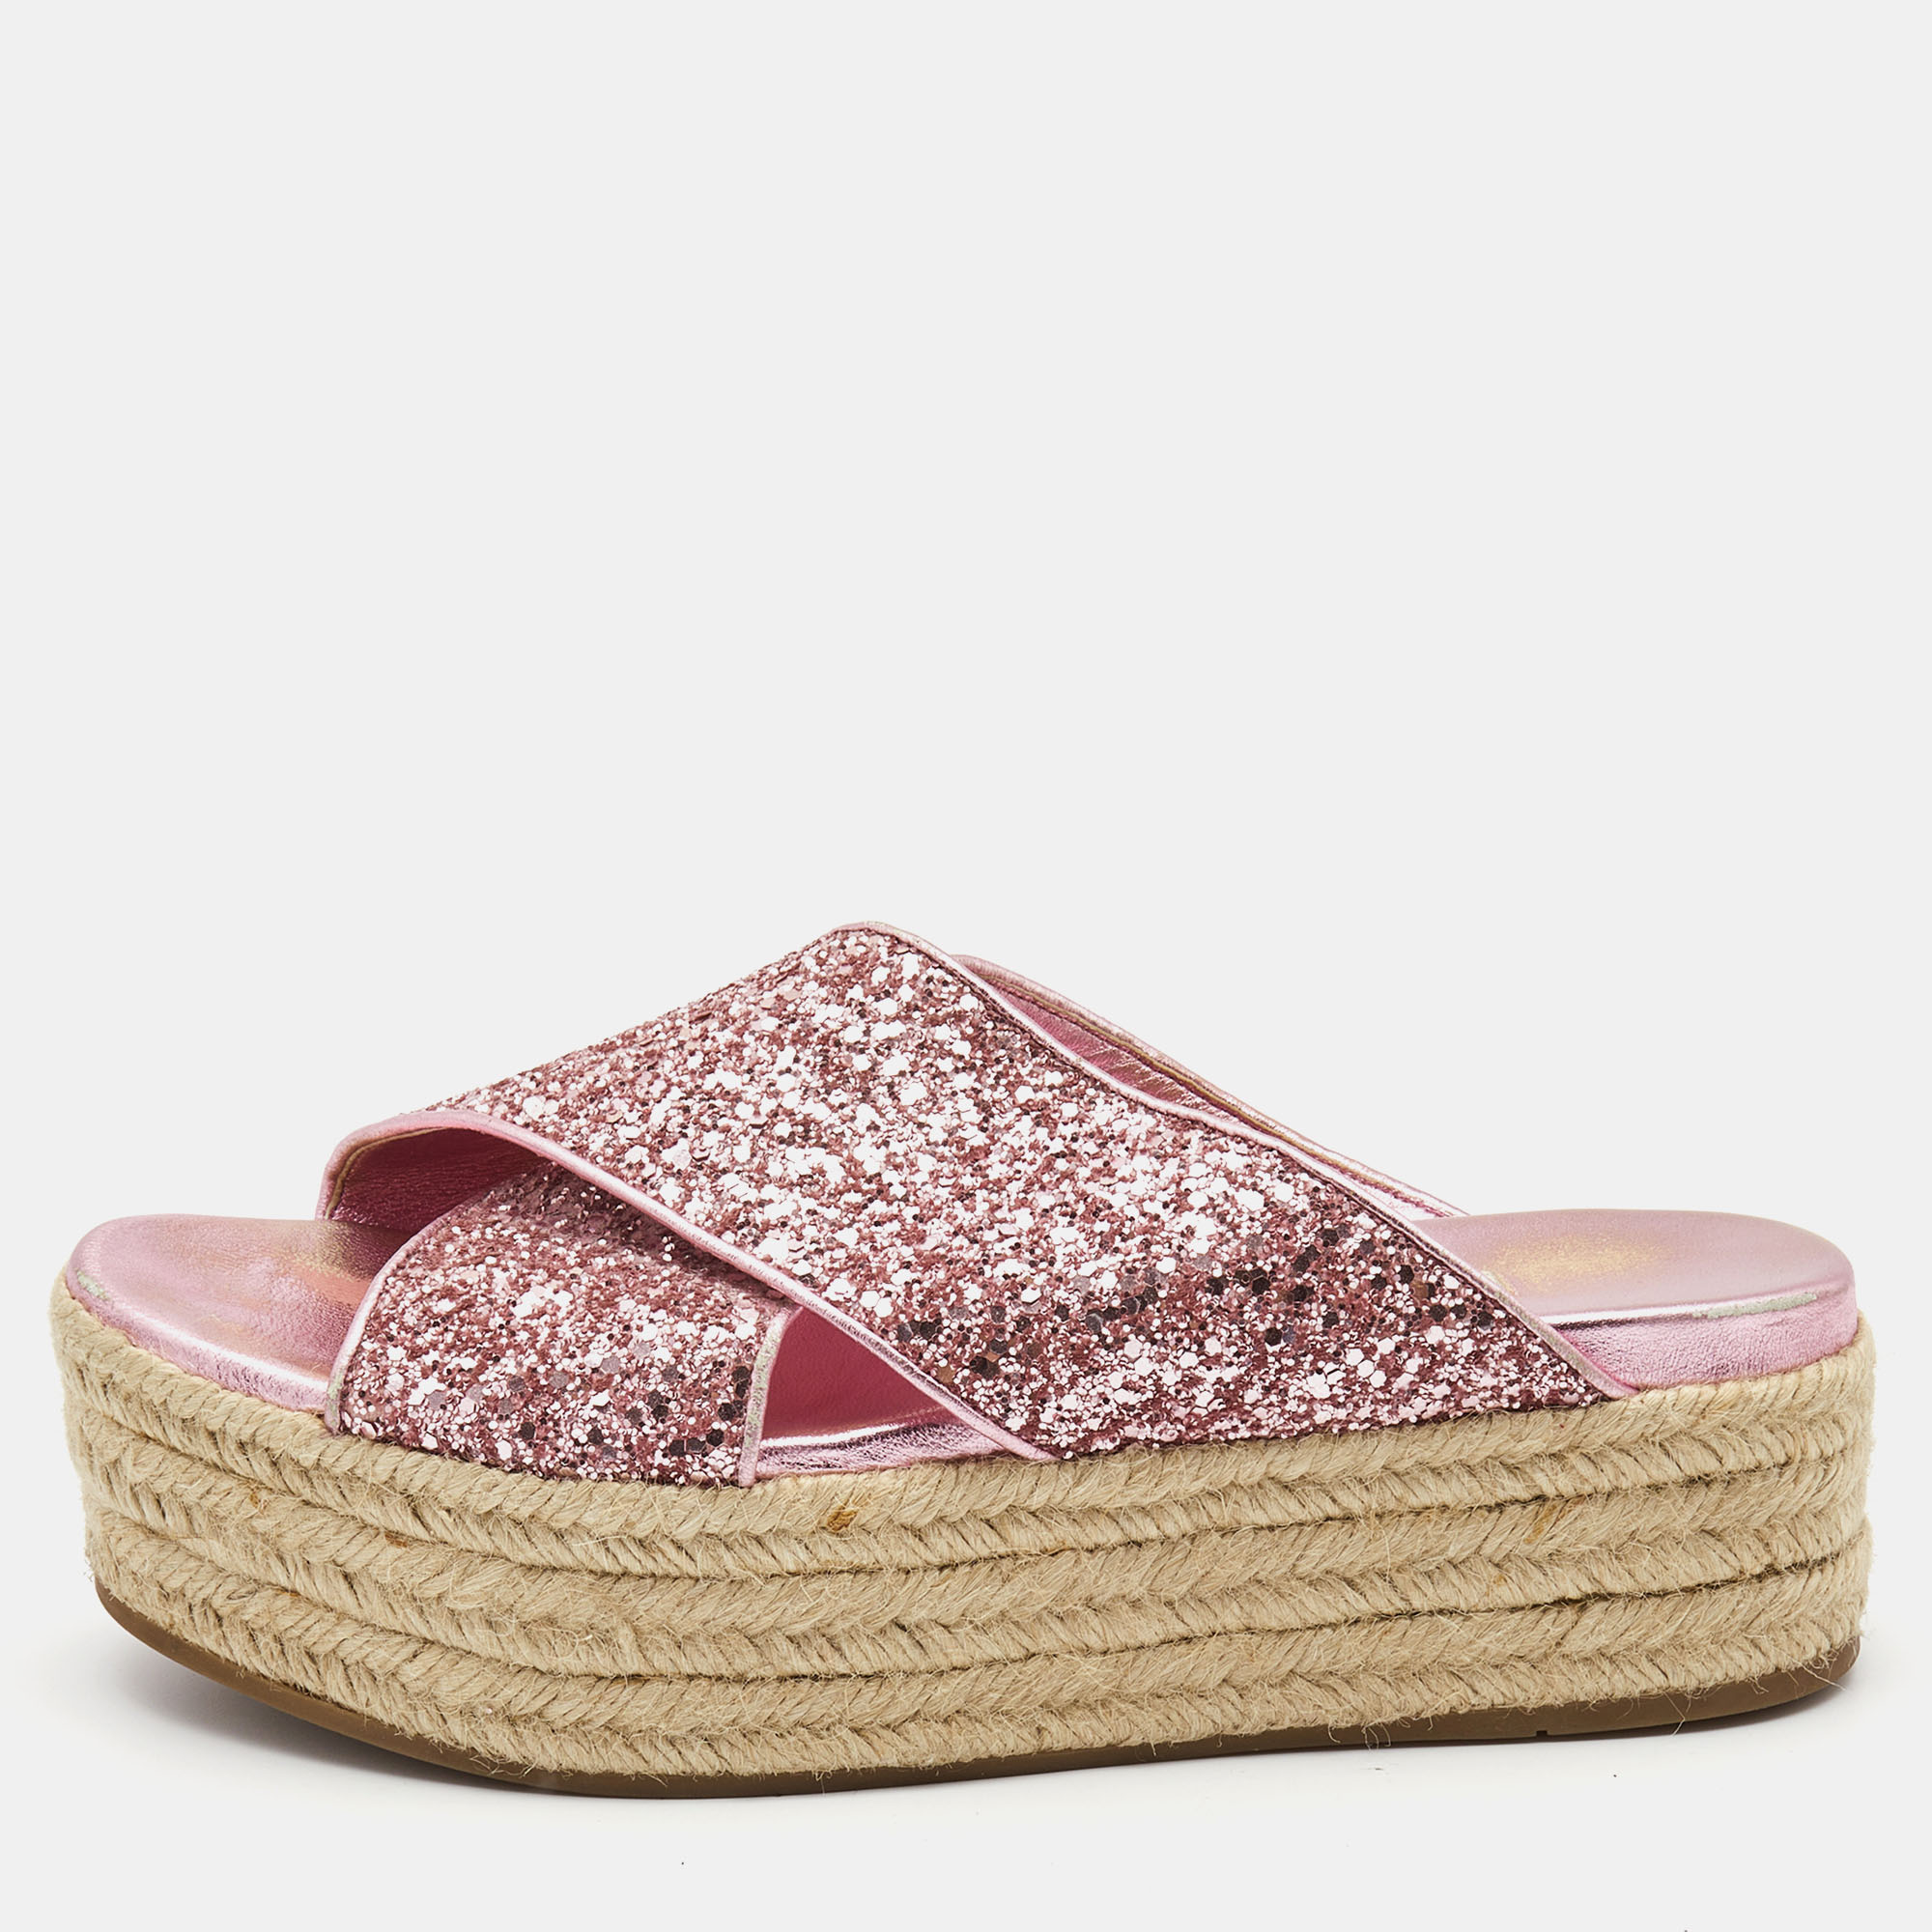 Miu Miu is well known for graceful designs and the label is synonymous with opulence femininity and elegance. Designed into a chunky silhouette these sandals have crisscrossed straps covered with glitter and thick espadrille platforms.